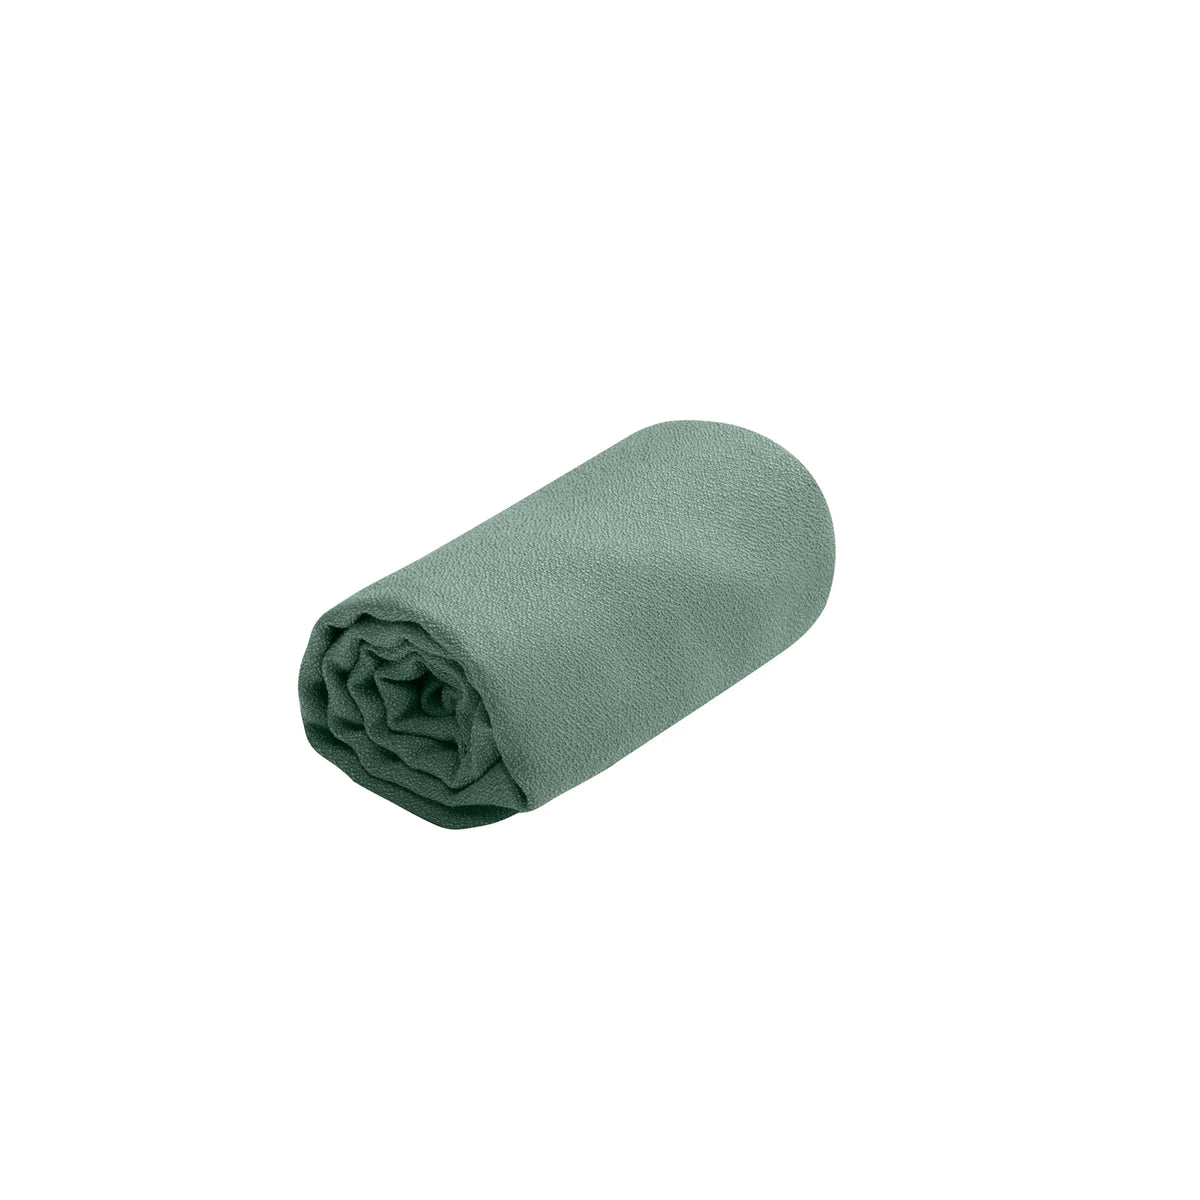 Sea to Summit - Airlite Towel Small - Sage Green